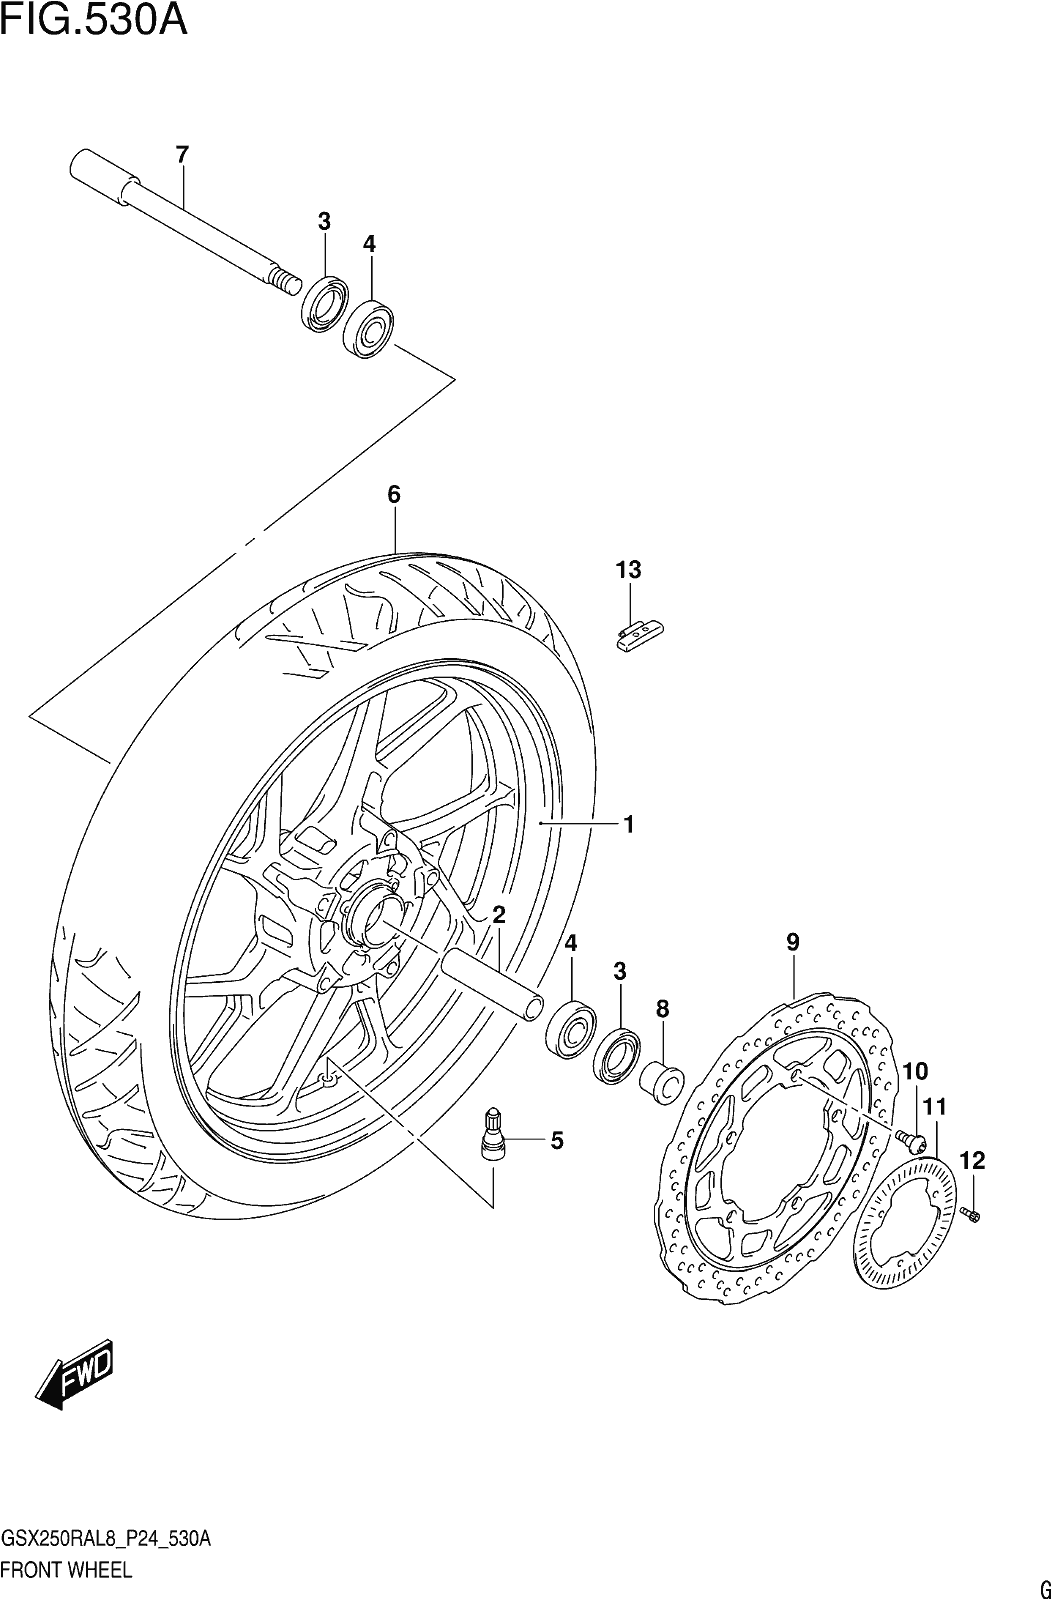 Fig.530a Front Wheel (gw250ral8 P24)